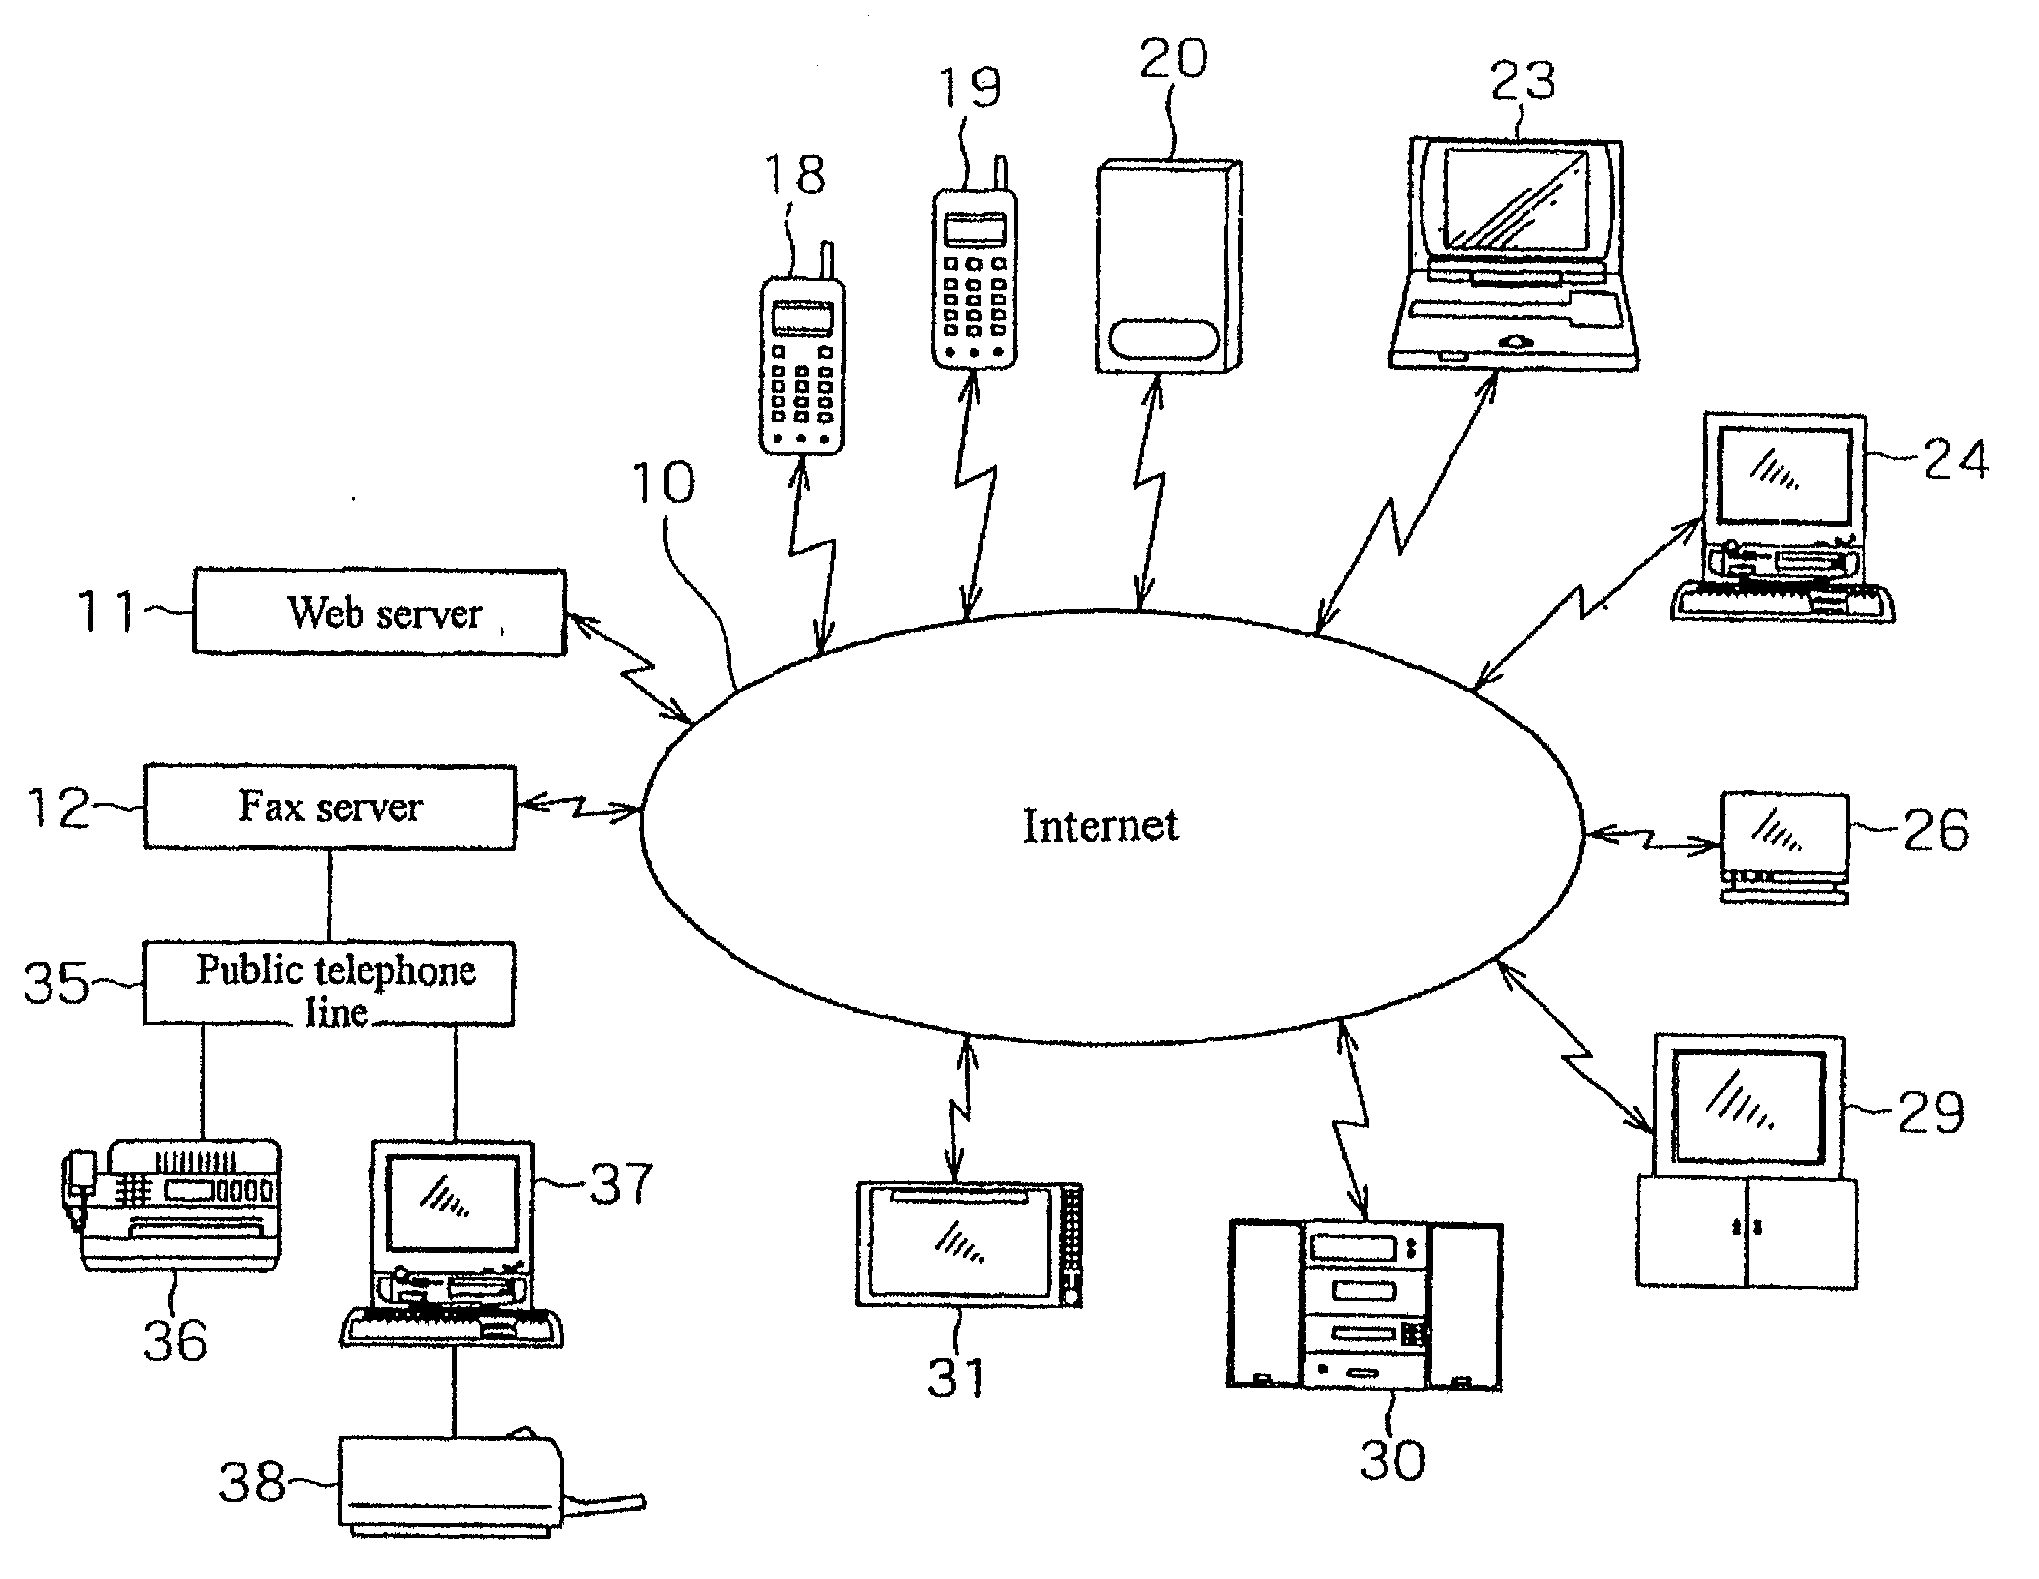 Method for hard-copying web pages, method for printing display screens, system for hard-copying web pages, and internet connection device equipped with current-position detection capabilities